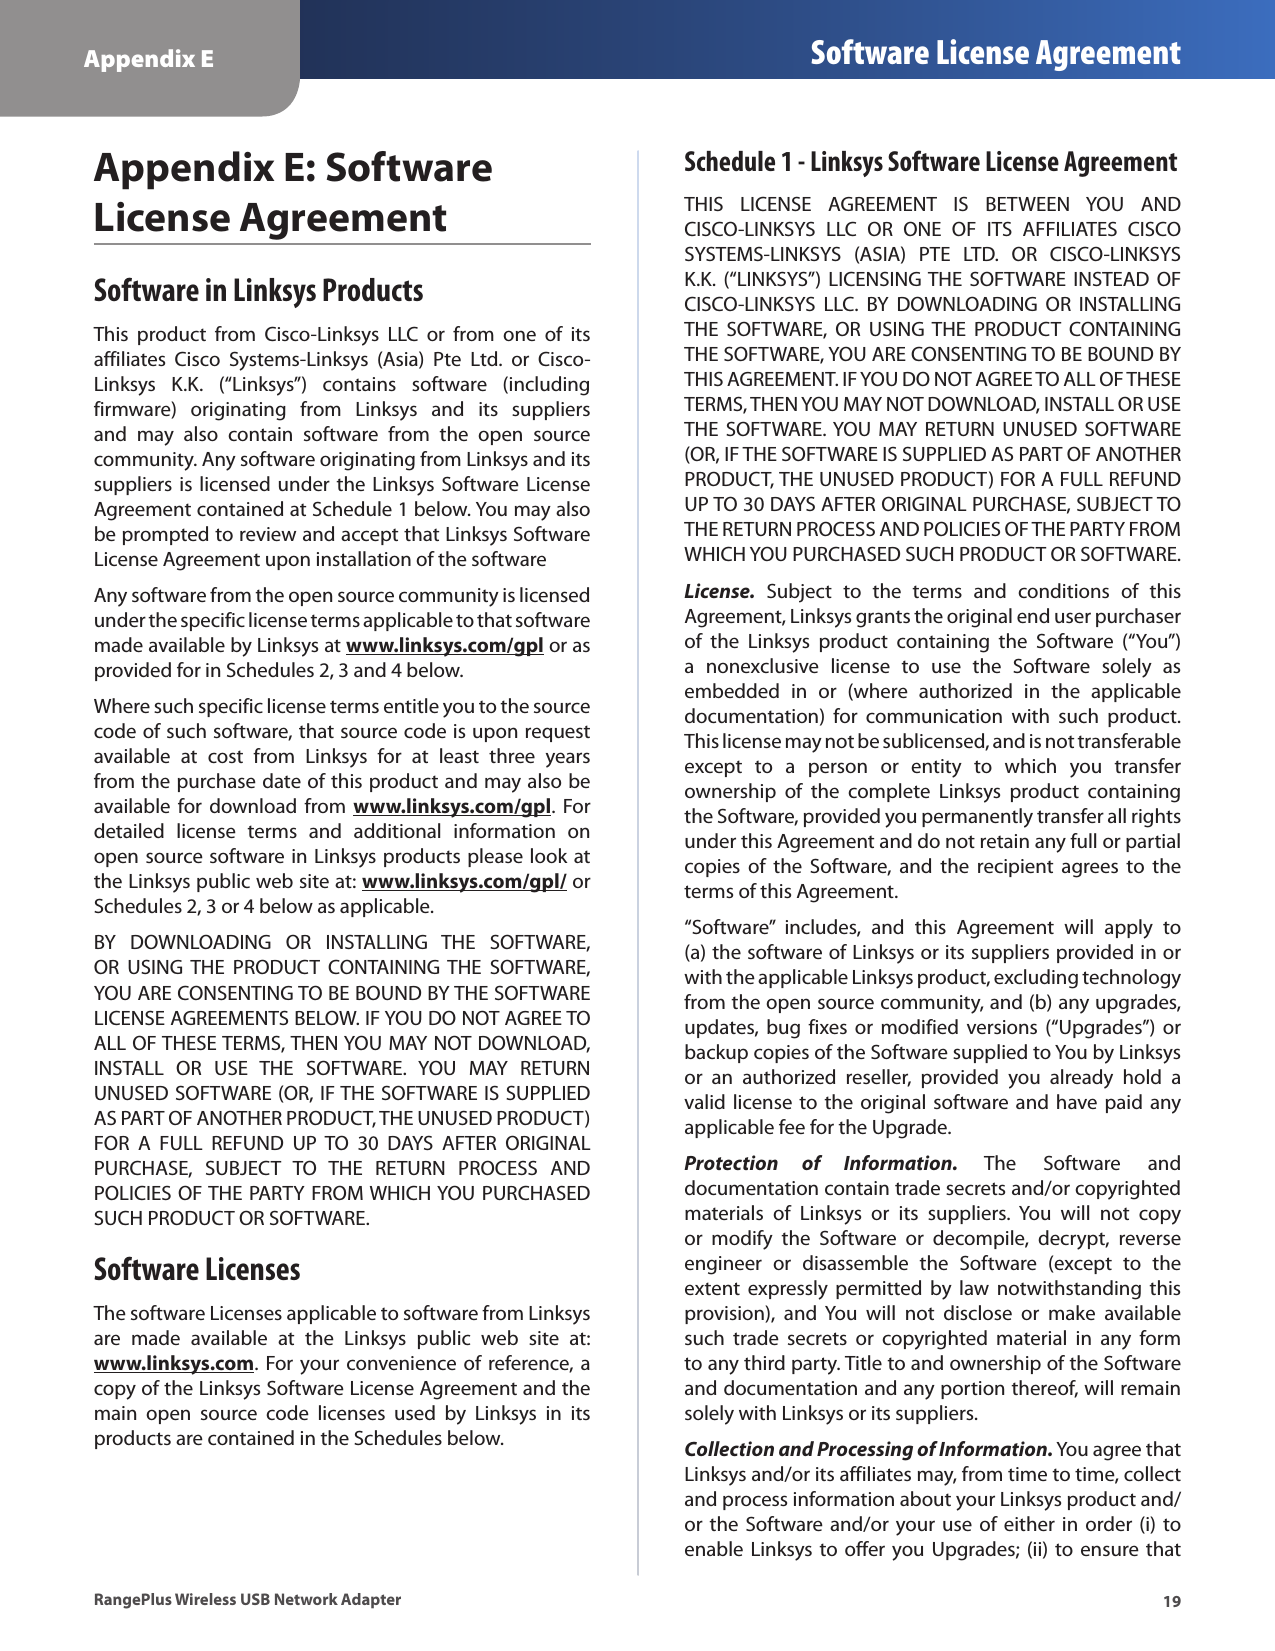 19Appendix E Software License AgreementRangePlus Wireless USB Network AdapterAppendix E: Software License AgreementSoftware in Linksys ProductsThis  product  from  Cisco-Linksys  LLC  or  from  one  of  its affiliates  Cisco  Systems-Linksys  (Asia)  Pte  Ltd.  or  Cisco-Linksys  K.K.  (“Linksys”)  contains  software  (including firmware)  originating  from  Linksys  and  its  suppliers and  may  also  contain  software  from  the  open  source community. Any software originating from Linksys and its suppliers is licensed under  the  Linksys Software License Agreement contained at Schedule 1 below. You may also be prompted to review and accept that Linksys Software License Agreement upon installation of the softwareAny software from the open source community is licensed under the specific license terms applicable to that software made available by Linksys at www.linksys.com/gpl or as provided for in Schedules 2, 3 and 4 below.Where such specific license terms entitle you to the source code of such software, that source code is upon request available  at  cost  from  Linksys  for  at  least  three  years from the purchase date of this product and may also be available for  download  from www.linksys.com/gpl.  For detailed  license  terms  and  additional  information  on open source software in Linksys products please look at the Linksys public web site at: www.linksys.com/gpl/ or Schedules 2, 3 or 4 below as applicable.BY  DOWNLOADING  OR  INSTALLING  THE  SOFTWARE, OR  USING  THE  PRODUCT  CONTAINING  THE  SOFTWARE, YOU ARE CONSENTING TO BE BOUND BY THE SOFTWARE LICENSE AGREEMENTS BELOW. IF YOU DO NOT AGREE TO ALL OF THESE TERMS, THEN YOU MAY NOT DOWNLOAD, INSTALL  OR  USE  THE  SOFTWARE.  YOU  MAY  RETURN UNUSED SOFTWARE (OR, IF THE SOFTWARE IS SUPPLIED AS PART OF ANOTHER PRODUCT, THE UNUSED PRODUCT) FOR  A  FULL  REFUND  UP  TO  30  DAYS  AFTER  ORIGINAL PURCHASE,  SUBJECT  TO  THE  RETURN  PROCESS  AND POLICIES OF THE PARTY FROM WHICH YOU PURCHASED SUCH PRODUCT OR SOFTWARE.Software LicensesThe software Licenses applicable to software from Linksys are  made  available  at  the  Linksys  public  web  site  at: www.linksys.com. For your convenience of reference, a copy of the Linksys Software License Agreement and the main  open  source  code  licenses  used  by  Linksys  in  its products are contained in the Schedules below.Schedule 1 - Linksys Software License AgreementTHIS  LICENSE  AGREEMENT  IS  BETWEEN  YOU  AND CISCO-LINKSYS  LLC  OR  ONE  OF  ITS  AFFILIATES  CISCO SYSTEMS-LINKSYS  (ASIA)  PTE  LTD.  OR  CISCO-LINKSYS K.K.  (“LINKSYS”)  LICENSING THE  SOFTWARE  INSTEAD OF CISCO-LINKSYS  LLC.  BY  DOWNLOADING  OR  INSTALLING THE  SOFTWARE,  OR  USING THE  PRODUCT  CONTAINING THE SOFTWARE, YOU ARE CONSENTING TO BE BOUND BY THIS AGREEMENT. IF YOU DO NOT AGREE TO ALL OF THESE TERMS, THEN YOU MAY NOT DOWNLOAD, INSTALL OR USE THE  SOFTWARE. YOU  MAY  RETURN  UNUSED SOFTWARE (OR, IF THE SOFTWARE IS SUPPLIED AS PART OF ANOTHER PRODUCT, THE UNUSED PRODUCT) FOR A FULL REFUND UP TO 30 DAYS AFTER ORIGINAL PURCHASE, SUBJECT TO THE RETURN PROCESS AND POLICIES OF THE PARTY FROM WHICH YOU PURCHASED SUCH PRODUCT OR SOFTWARE.License.  Subject  to  the  terms  and  conditions  of  this Agreement, Linksys grants the original end user purchaser of  the  Linksys  product  containing  the  Software  (“You”) a  nonexclusive  license  to  use  the  Software  solely  as embedded  in  or  (where  authorized  in  the  applicable documentation)  for  communication  with  such  product. This license may not be sublicensed, and is not transferable except  to  a  person  or  entity  to  which  you  transfer ownership  of  the  complete  Linksys  product  containing the Software, provided you permanently transfer all rights under this Agreement and do not retain any full or partial copies  of  the  Software,  and  the  recipient  agrees  to  the terms of this Agreement.“Software”  includes,  and  this  Agreement  will  apply  to (a) the software of Linksys or its suppliers provided in or with the applicable Linksys product, excluding technology from the open source community, and (b) any upgrades, updates, bug  fixes  or  modified versions  (“Upgrades”)  or backup copies of the Software supplied to You by Linksys or  an  authorized  reseller,  provided  you  already  hold  a valid license to the original  software and have paid any applicable fee for the Upgrade.Protection  of  Information.  The  Software  and documentation contain trade secrets and/or copyrighted materials  of  Linksys  or  its  suppliers.  You  will  not  copy or  modify  the  Software  or  decompile,  decrypt,  reverse engineer  or  disassemble  the  Software  (except  to  the extent  expressly permitted  by  law  notwithstanding  this provision),  and  You  will  not  disclose  or  make  available such  trade  secrets  or  copyrighted  material  in  any  form to any third party. Title to and ownership of the Software and documentation and any portion thereof, will remain solely with Linksys or its suppliers.Collection and Processing of Information. You agree that Linksys and/or its affiliates may, from time to time, collect and process information about your Linksys product and/or the  Software and/or your use  of either in order  (i)  to enable Linksys to offer you Upgrades; (ii) to ensure that 